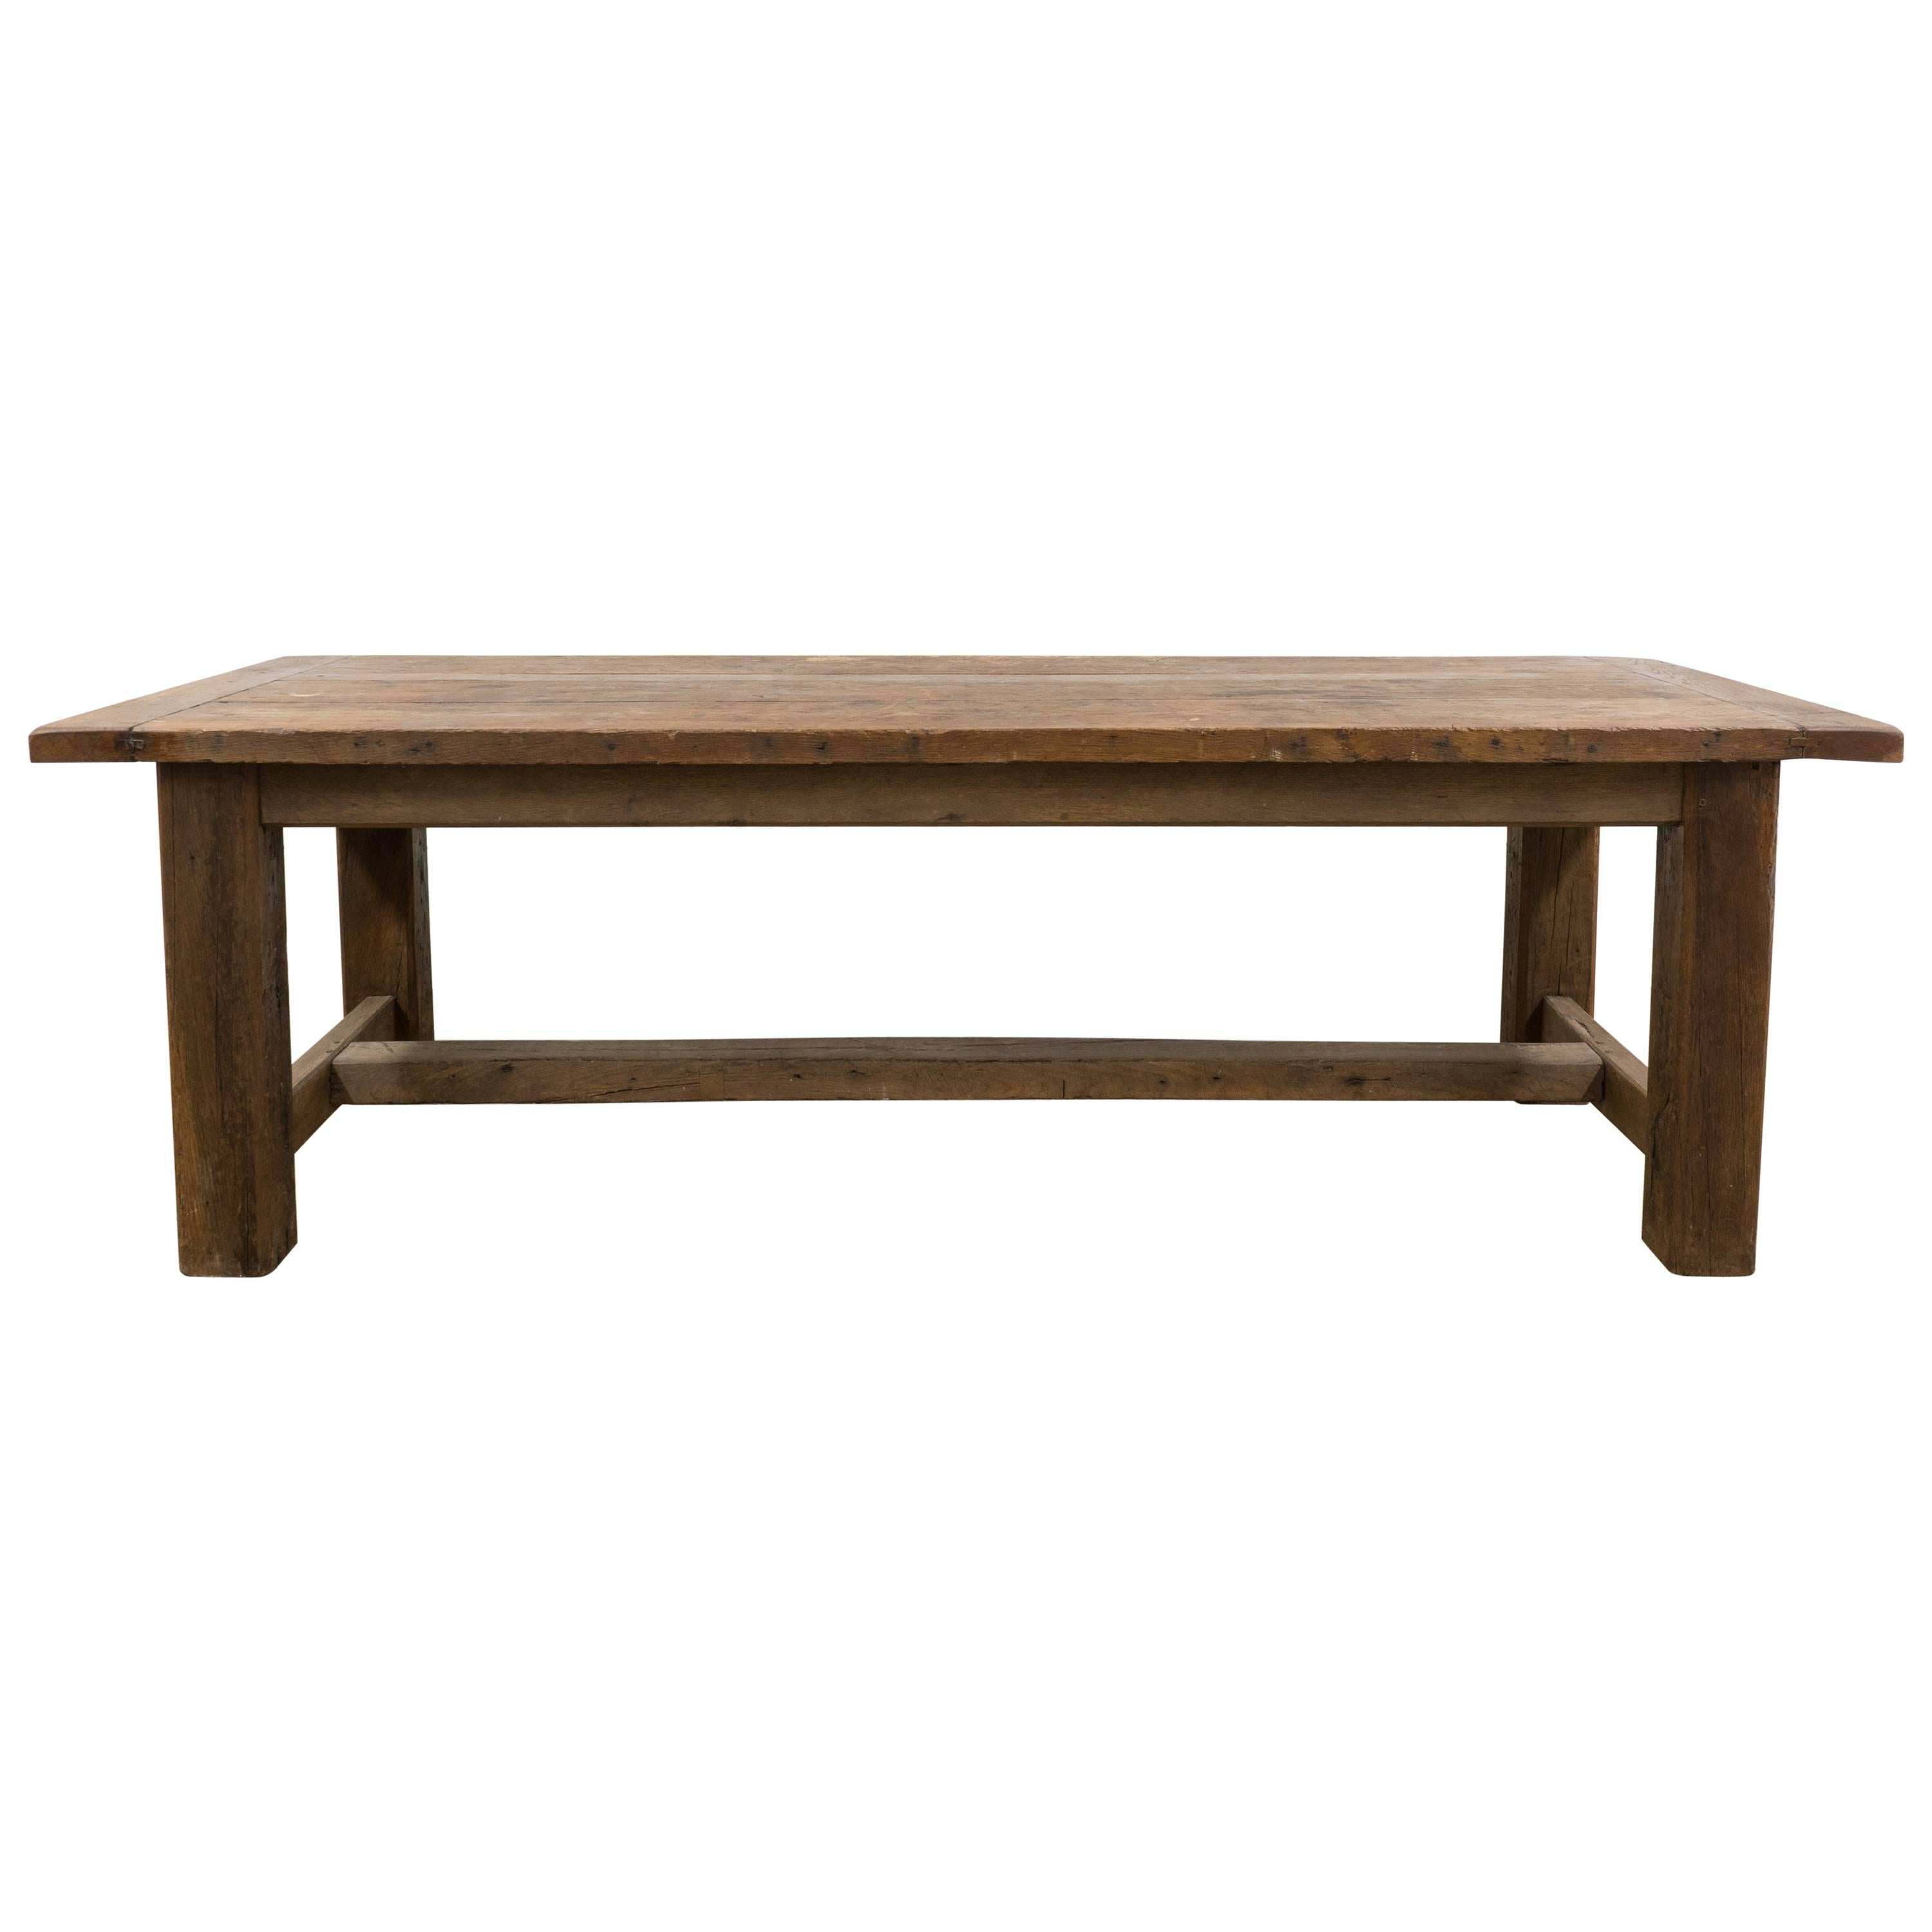 Original French, 1900 Oak Plank Dining Table